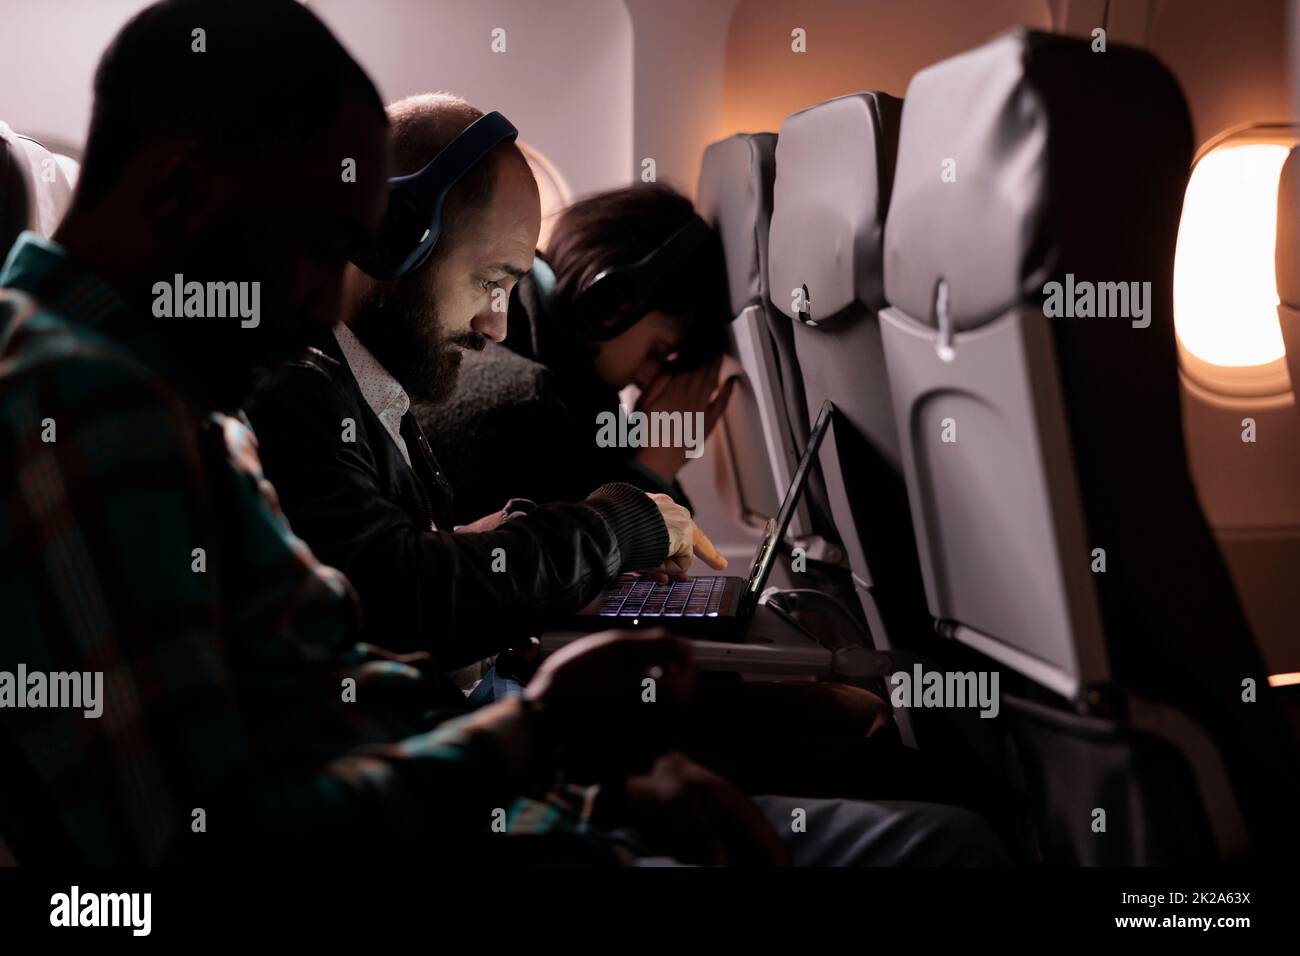 Multiethnic group of people flying in economy class together to arrive at destination, man using laptop computer during international flight. Tourists travelling abroad by airplane. Stock Photo